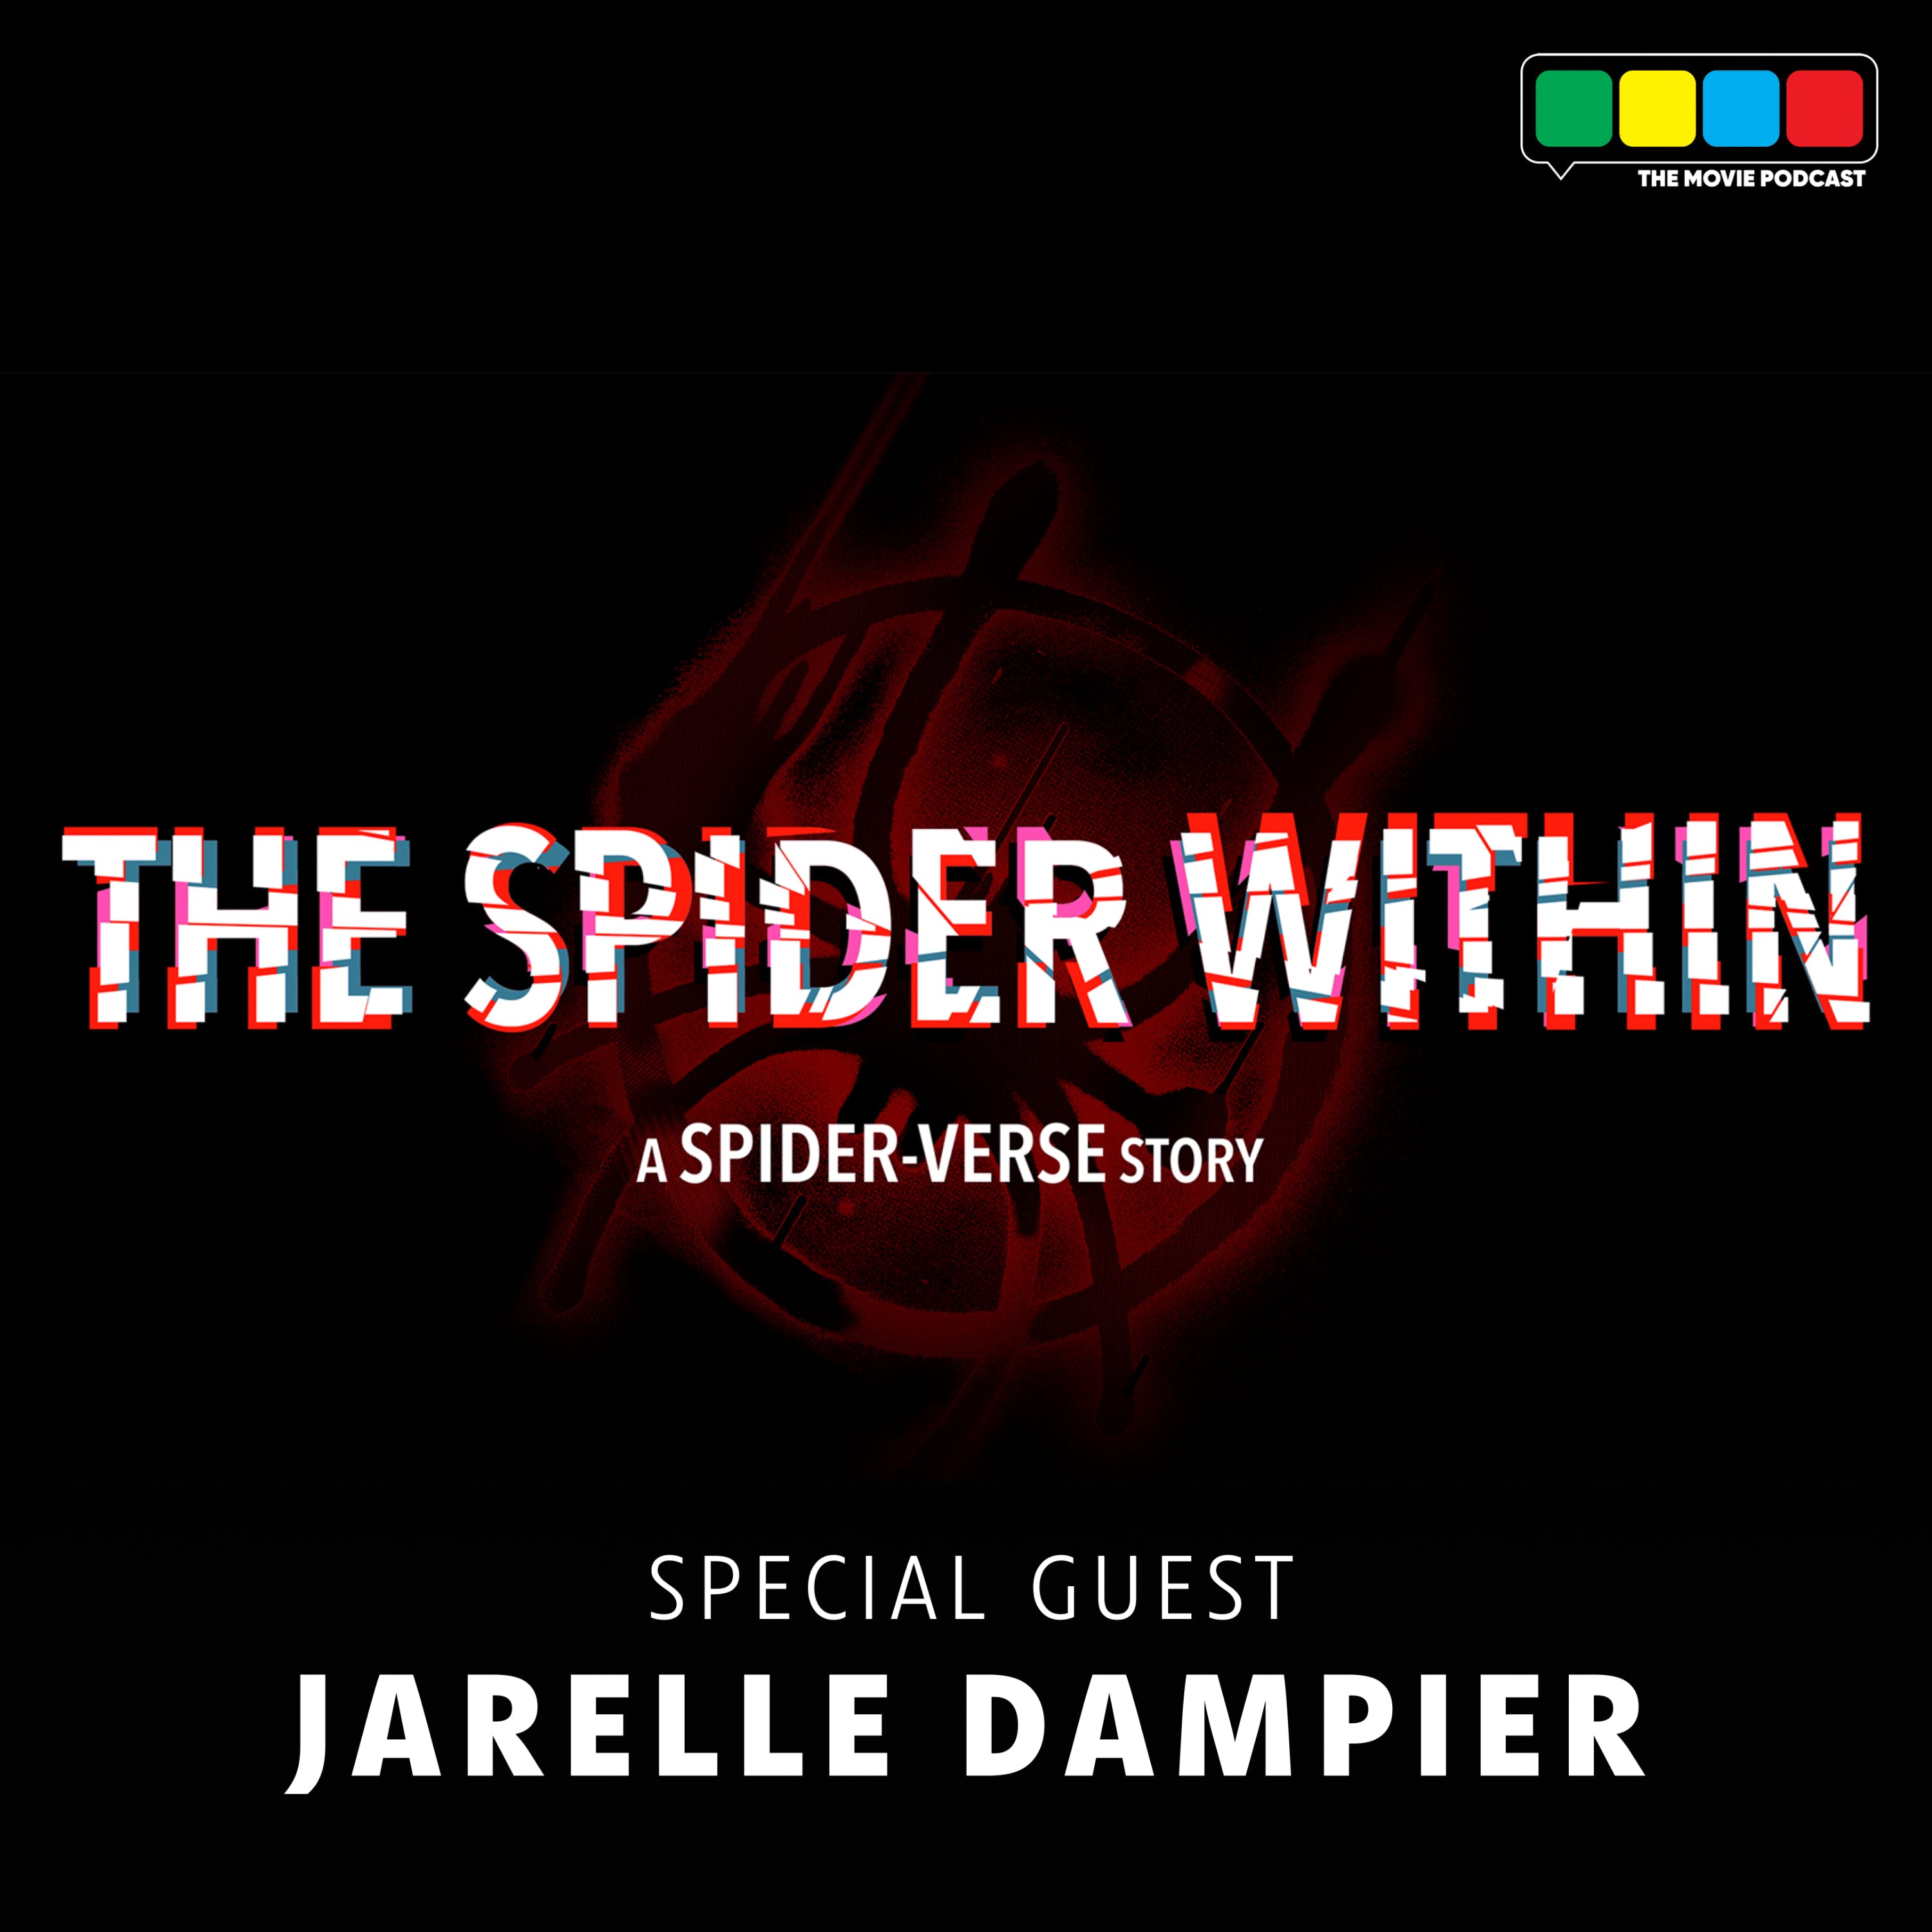 The Spider Within: A Spider-Verse Story Director Jarelle Dampier Breaks Down Spider-Man Short Film, Exploring Anxiety and Mental Health Through Horror, and Why Miles Morales Resonates